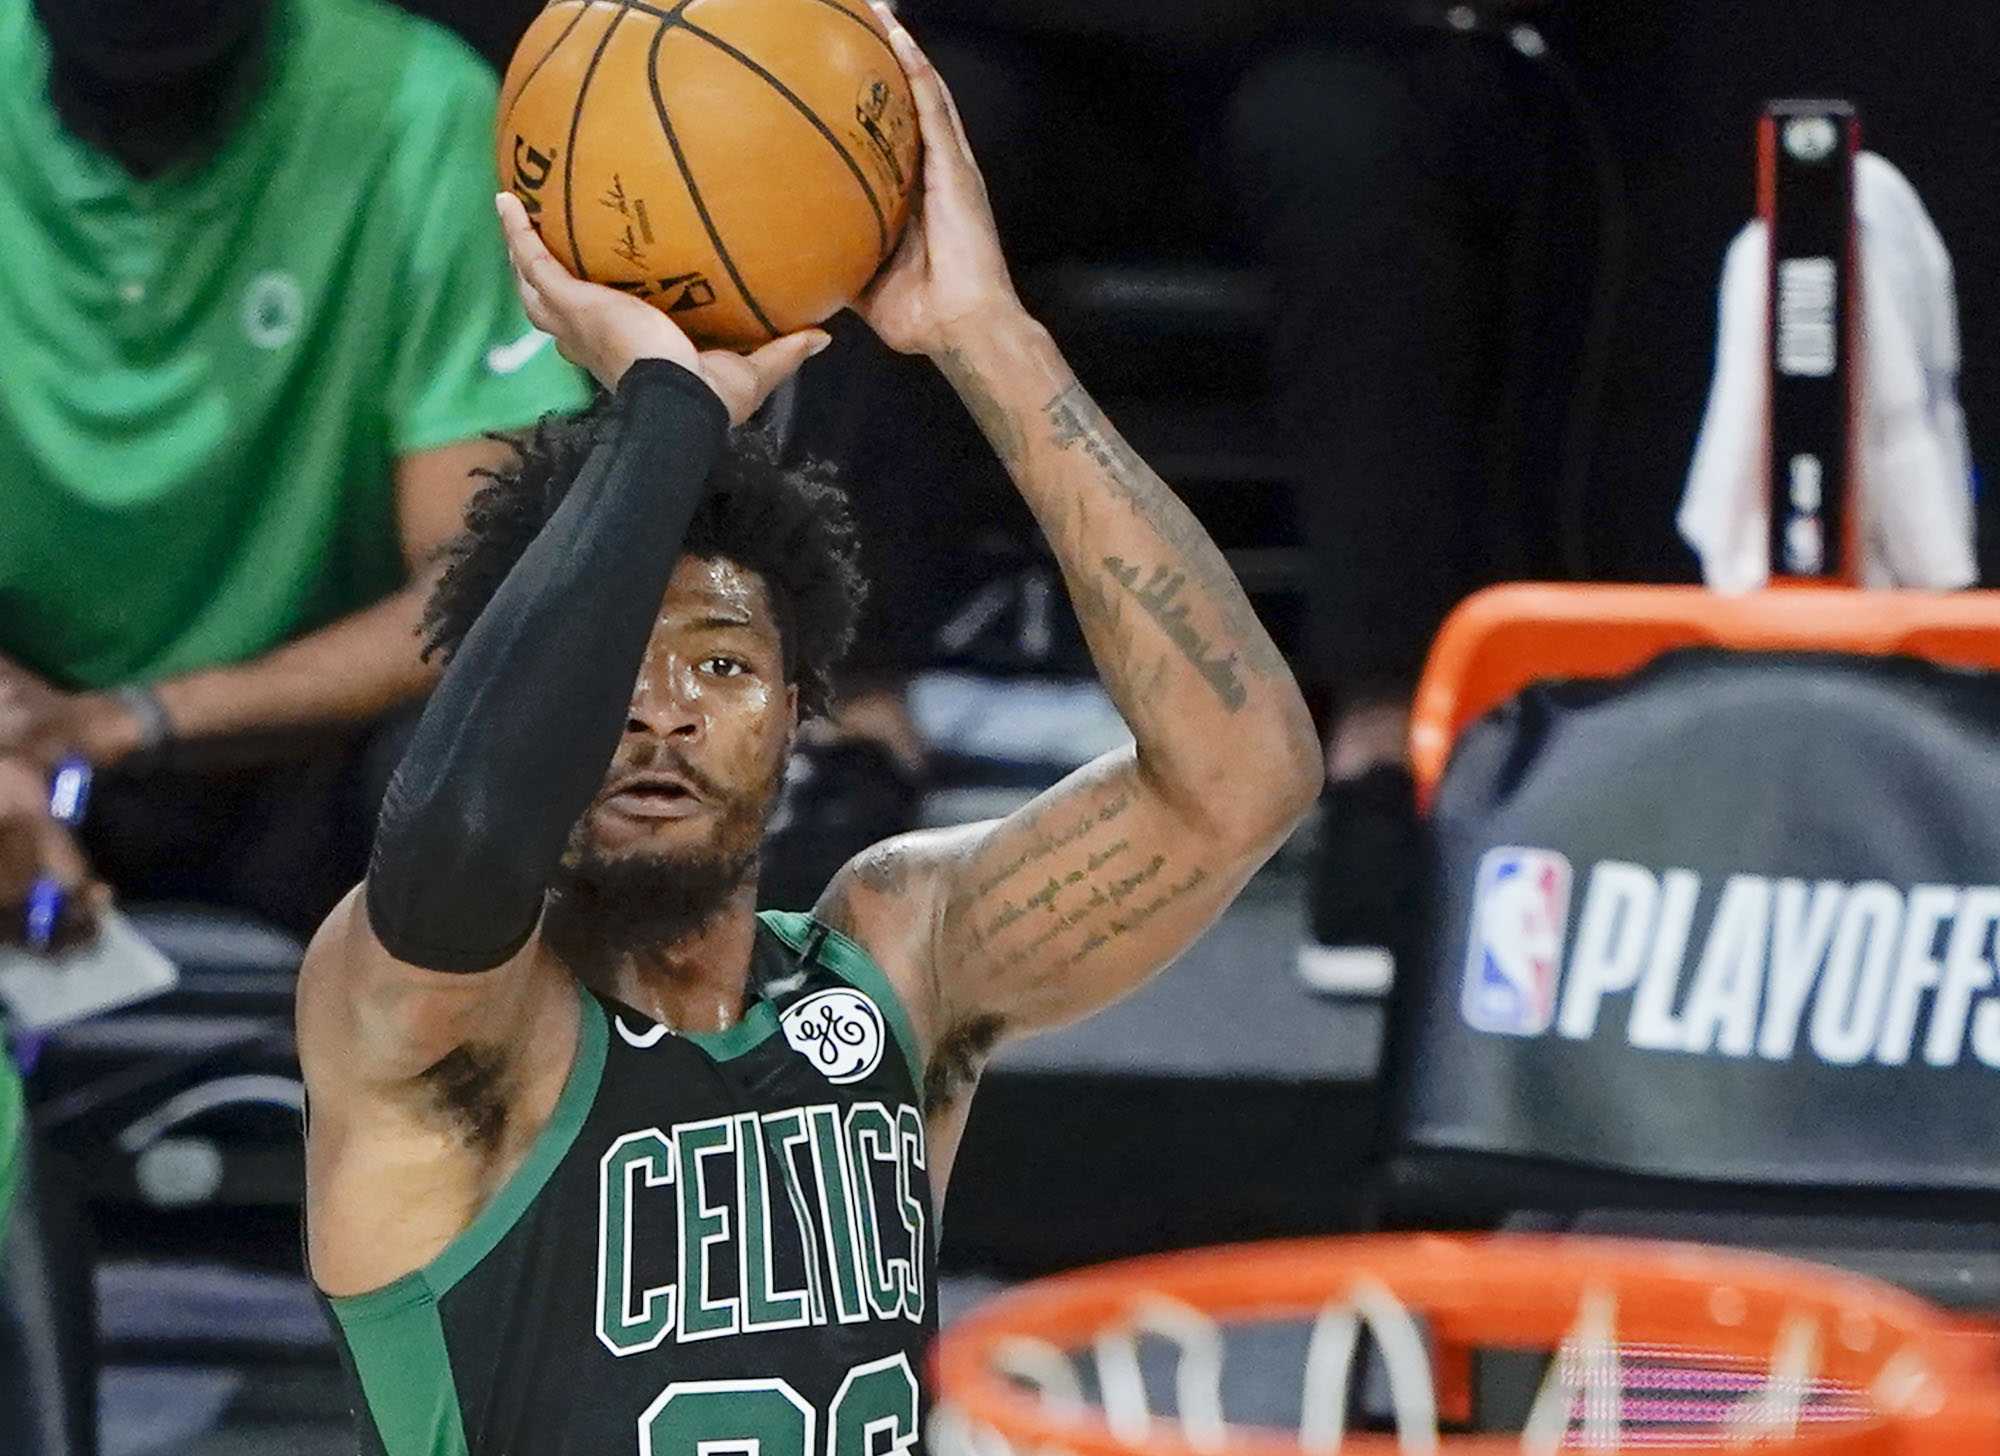  NBA Playoffs Daily Roundup: Celtics Get Smart to Take 2-0 Lead Over Raptors